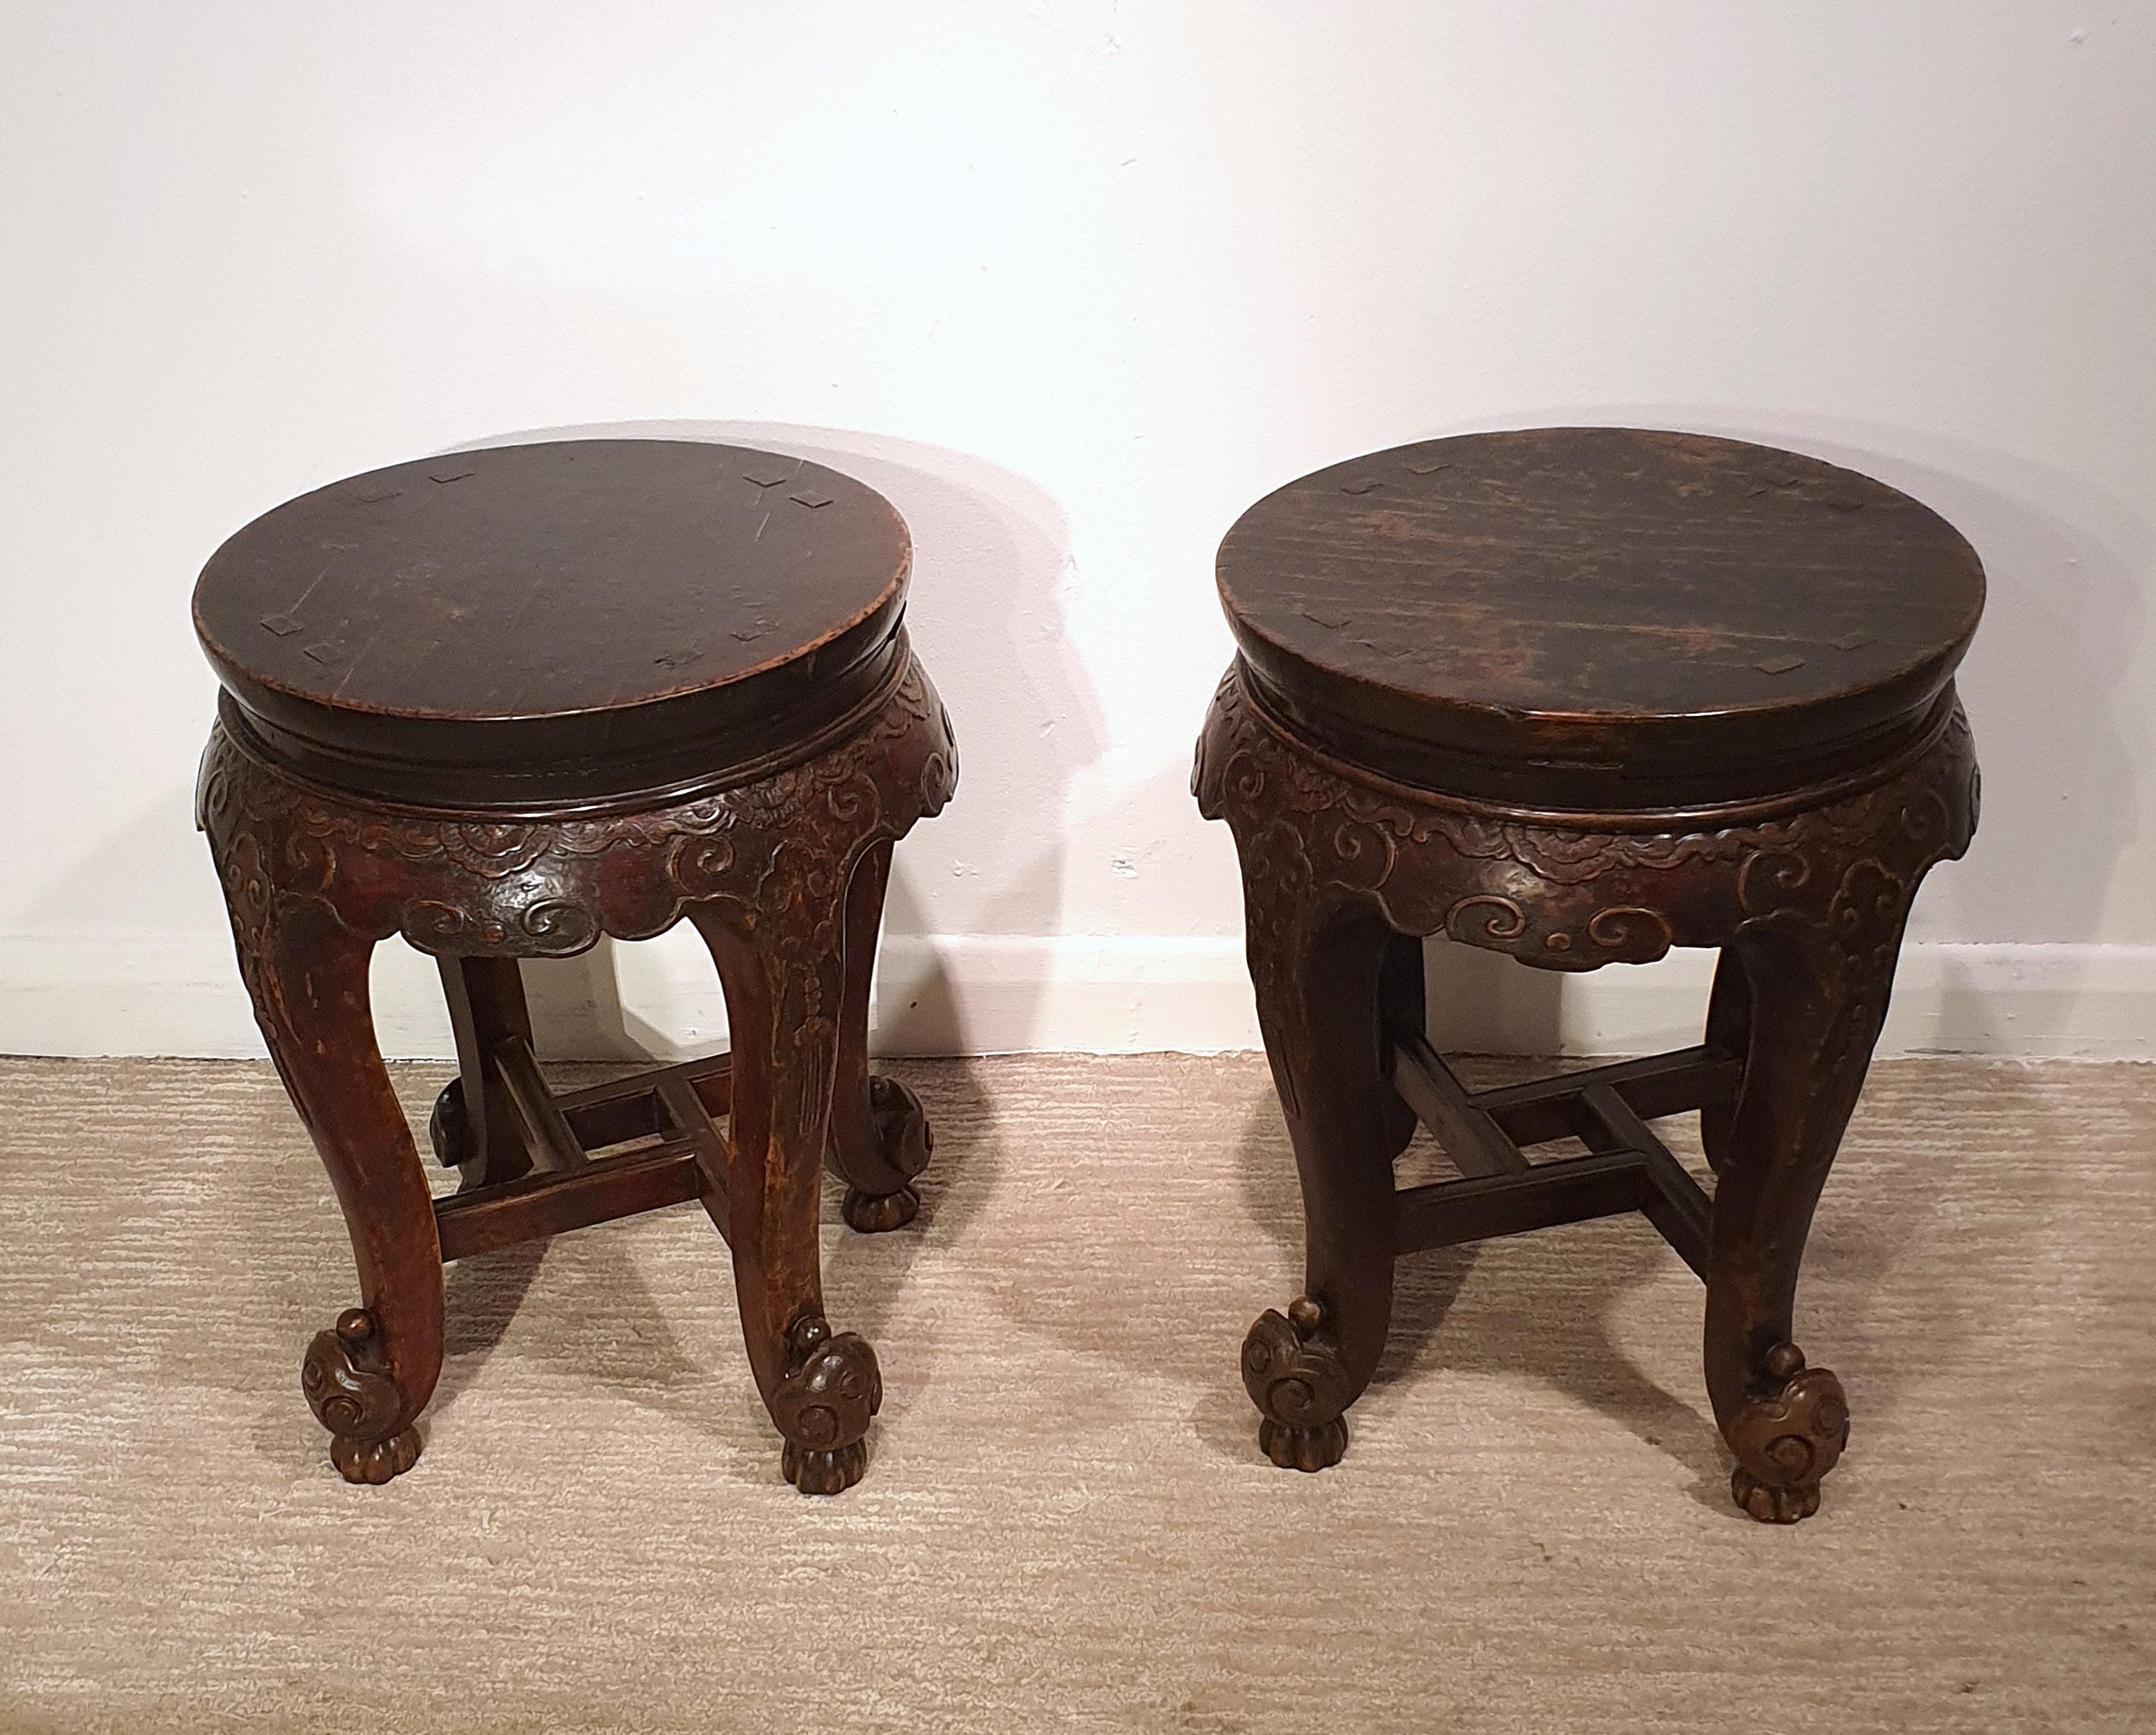 This lovely and decorative pair of 19th century Chinese hardwood stands feature a circular top and supported on 4 ornately carved cabriole legs joined together with a squared stretcher at the base. Each one measures 15 1/2 in - 39.4 cm in diameter